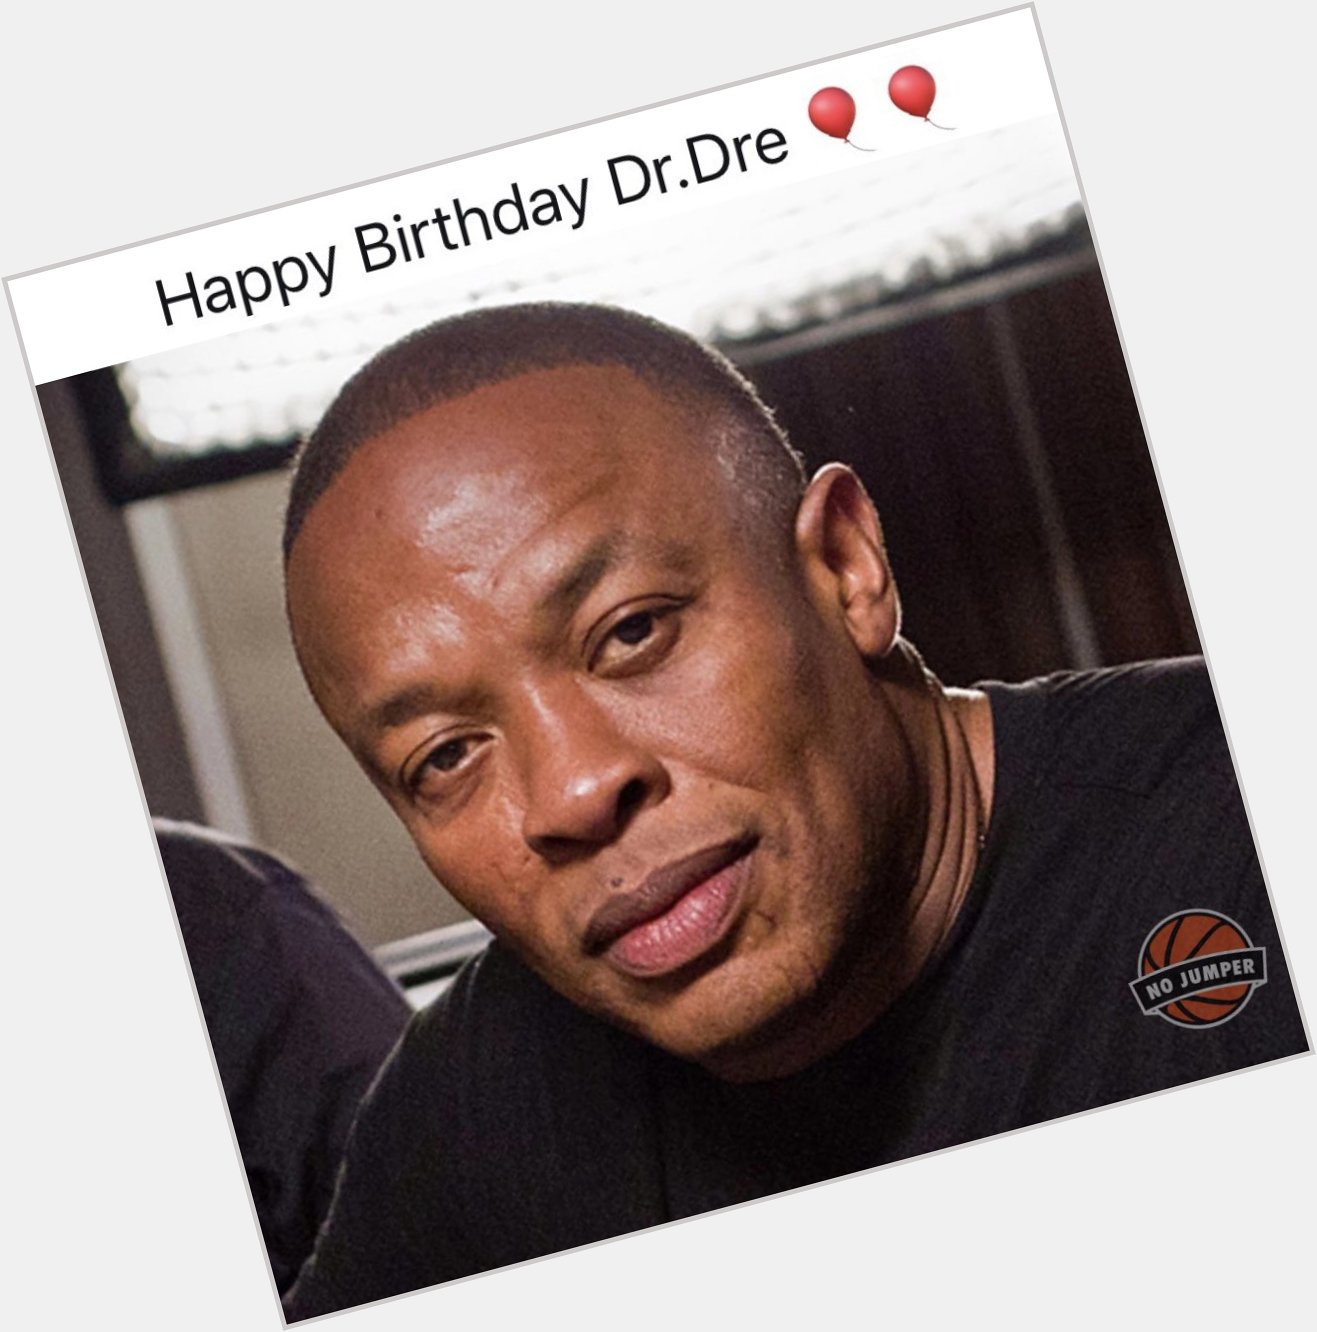 Happy birthday to a legend ! Whats your favorite Dr.Dre track? 